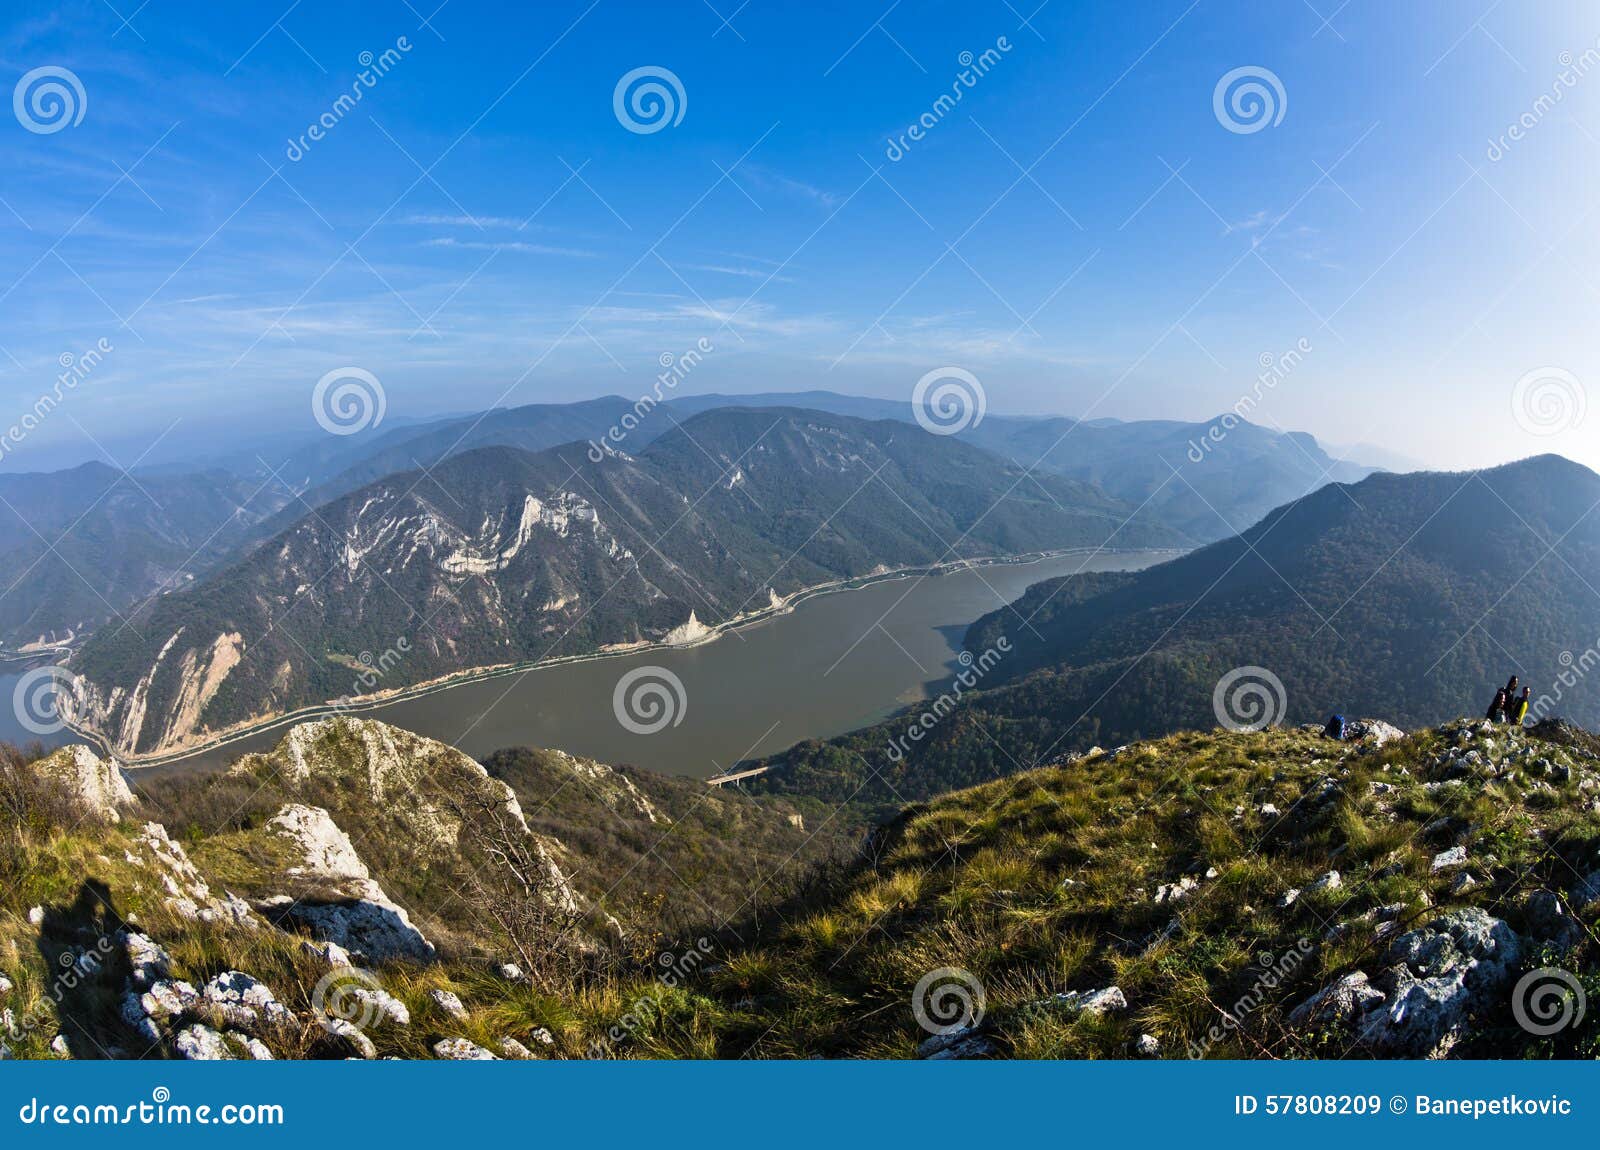 hillsides of a miroc mountain over danube river and djerdap gorge and national park